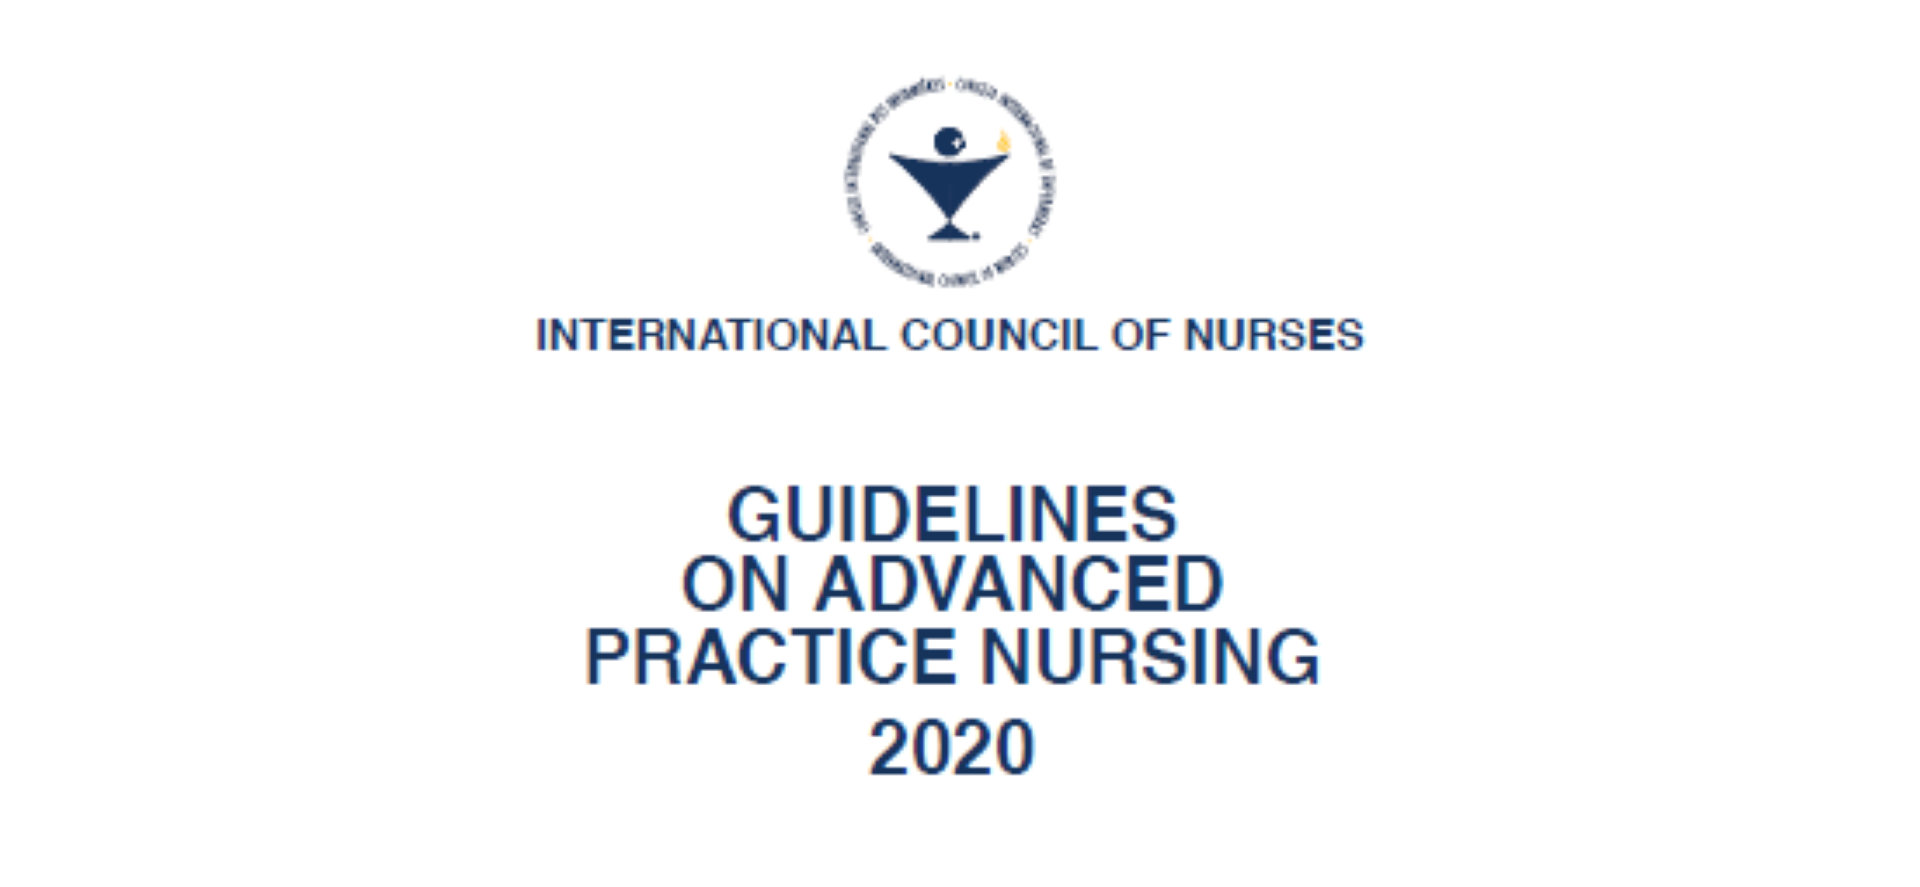 ICN launches new Advanced Practice Nursing guidelines and calls for